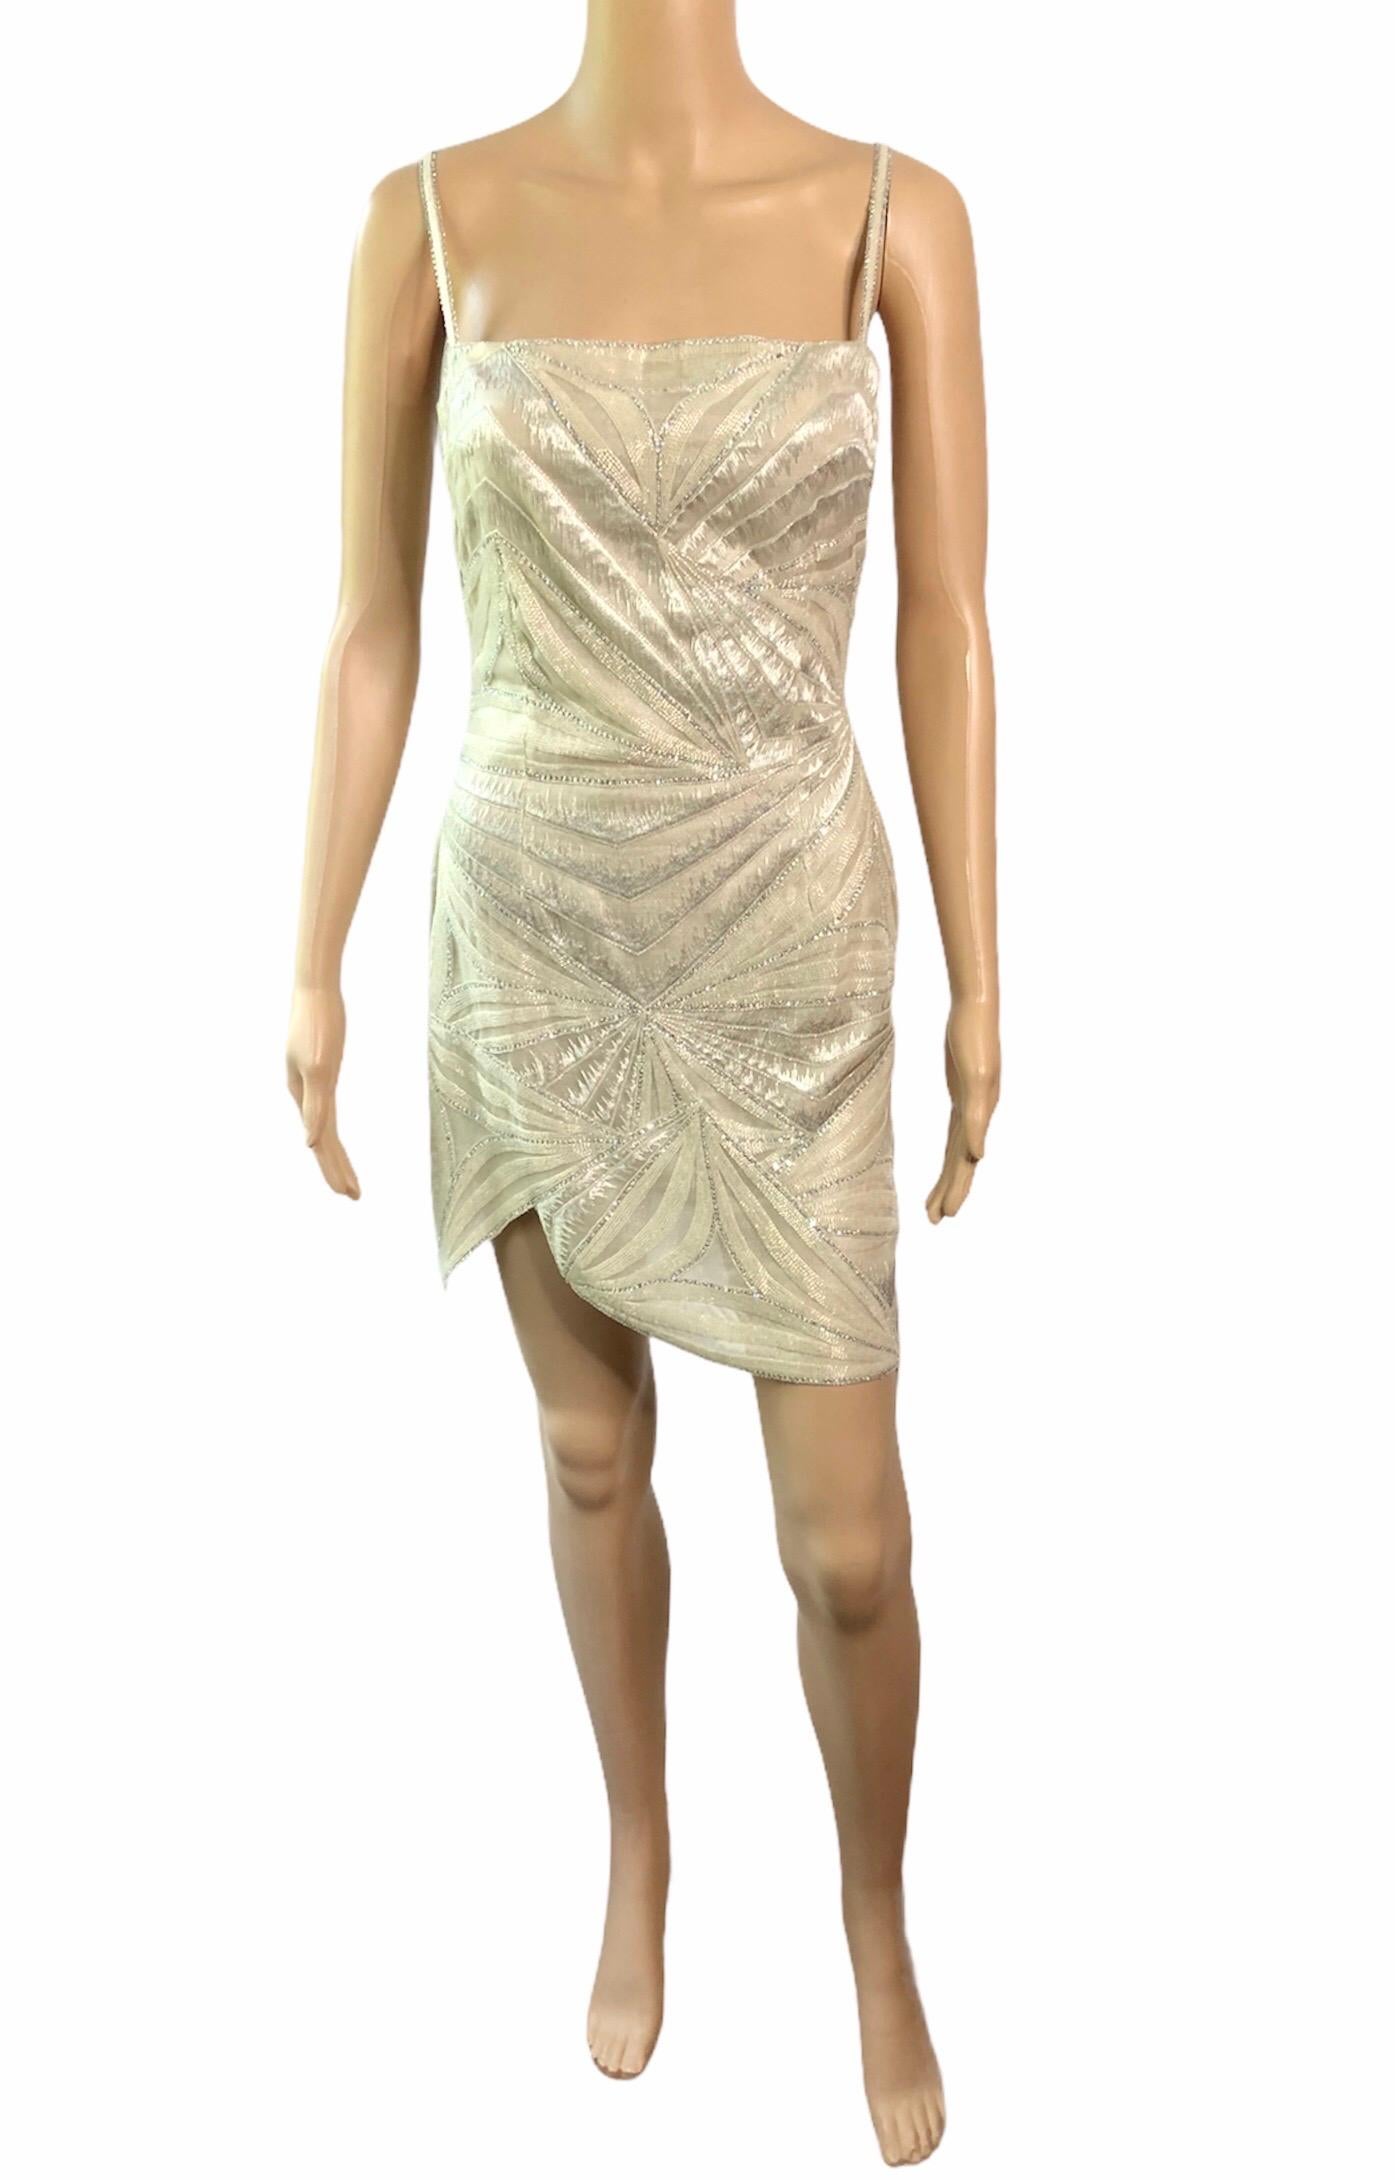 Atelier Versace Haute Couture F/W 1998 Embellished Sheer Cutout Mini Dress For Sale 3